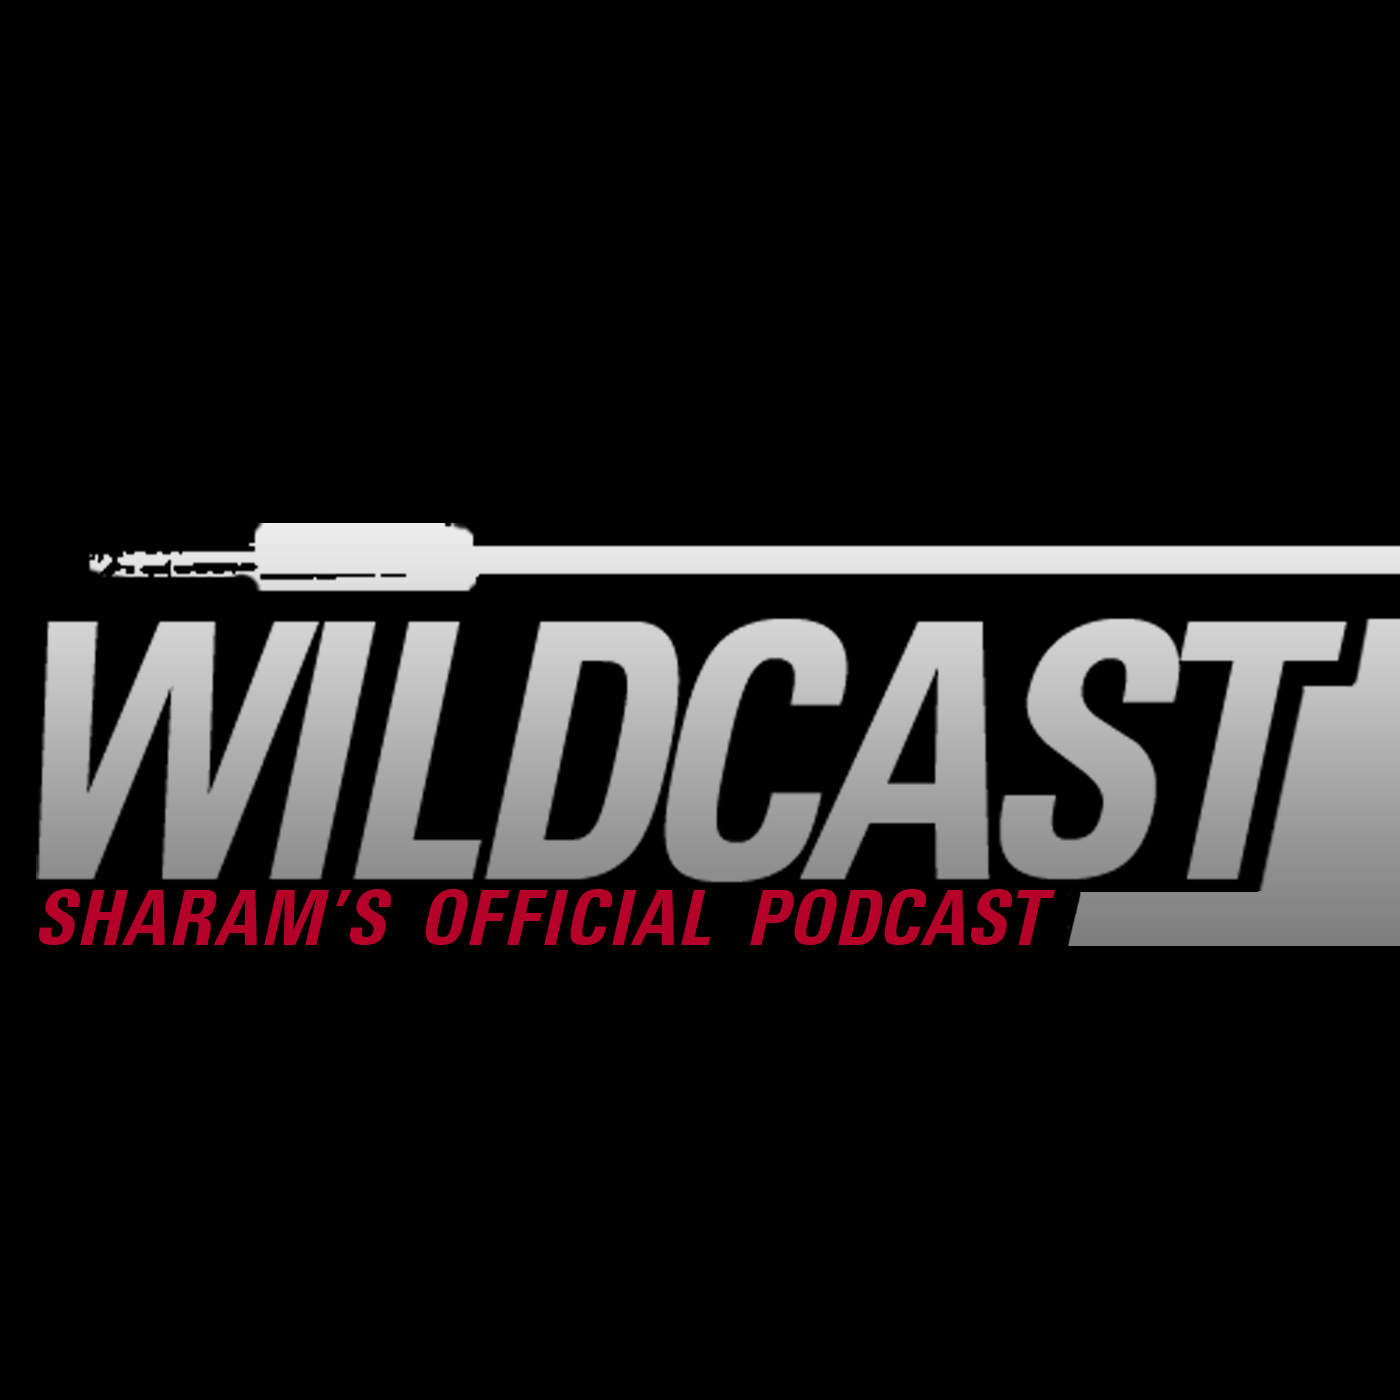 WILDCAST EPISODE 41 - Sharam's Official Podcast